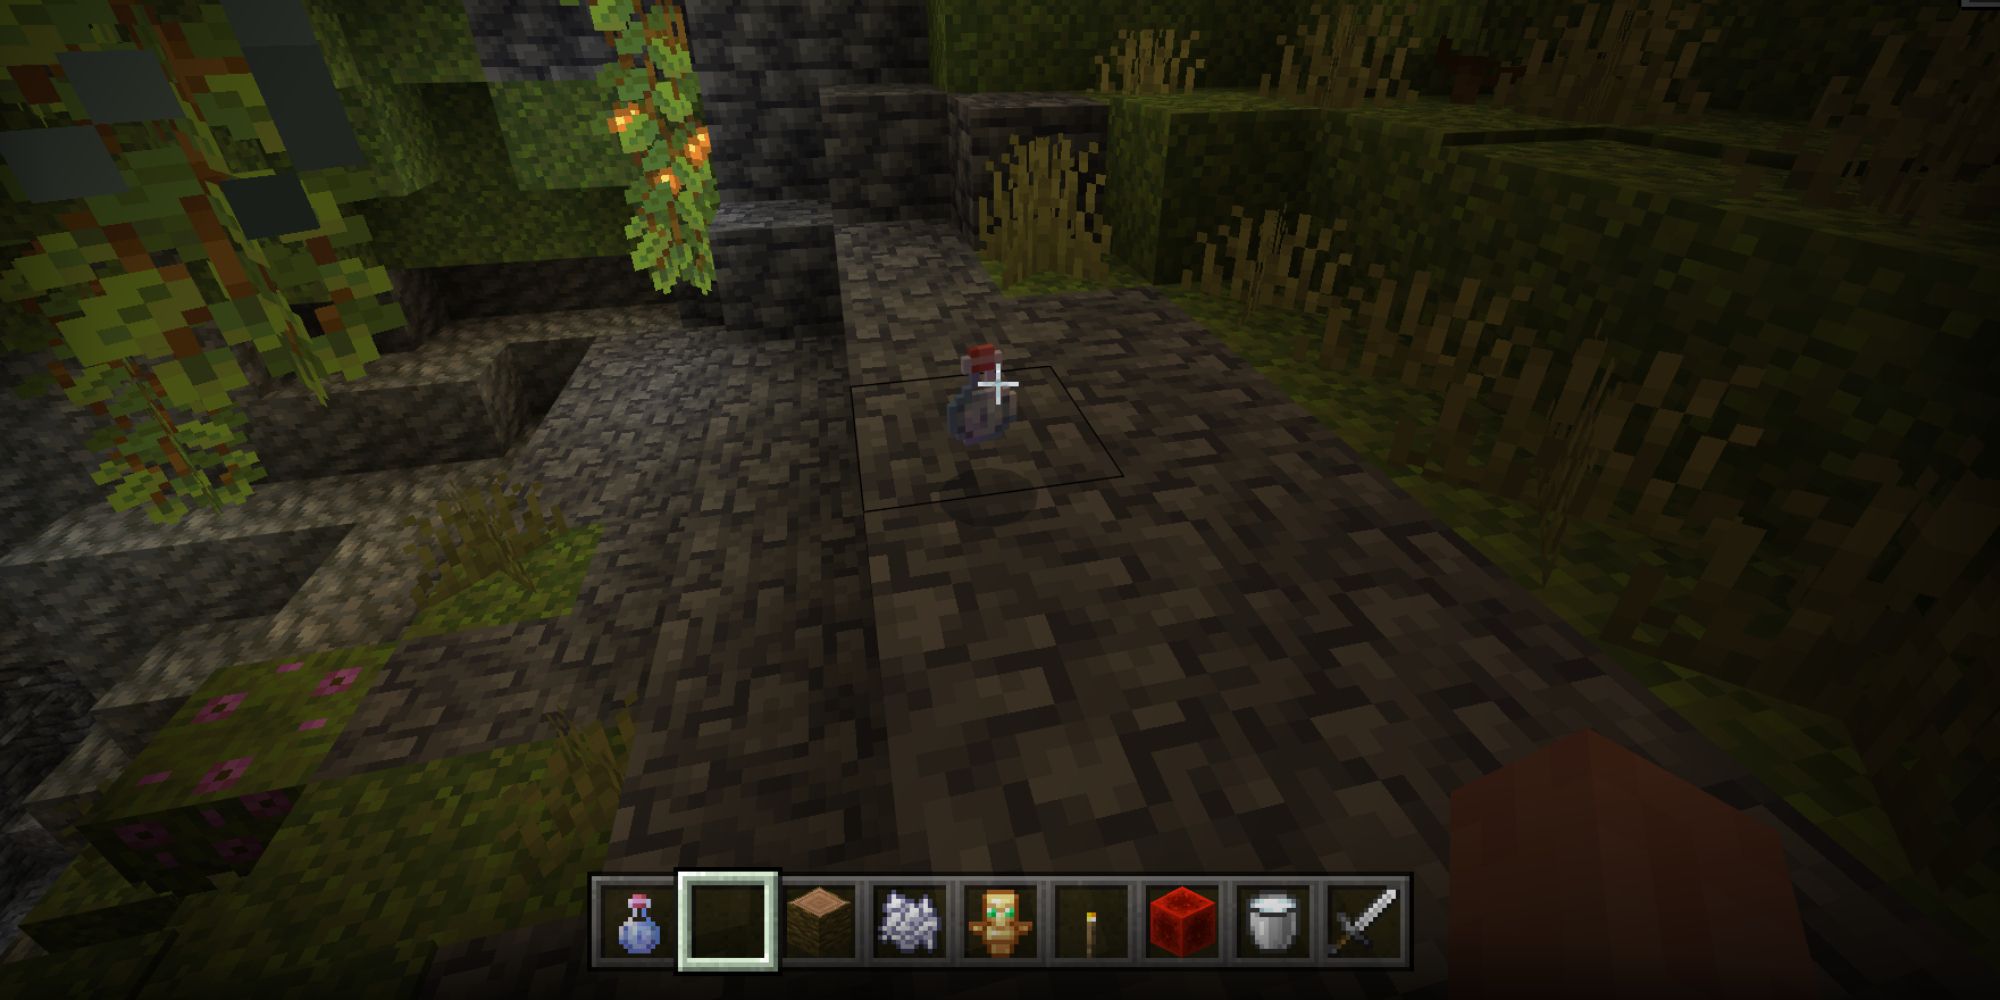 Minecraft Screenshot Of Potion Of Swiftness On The Ground